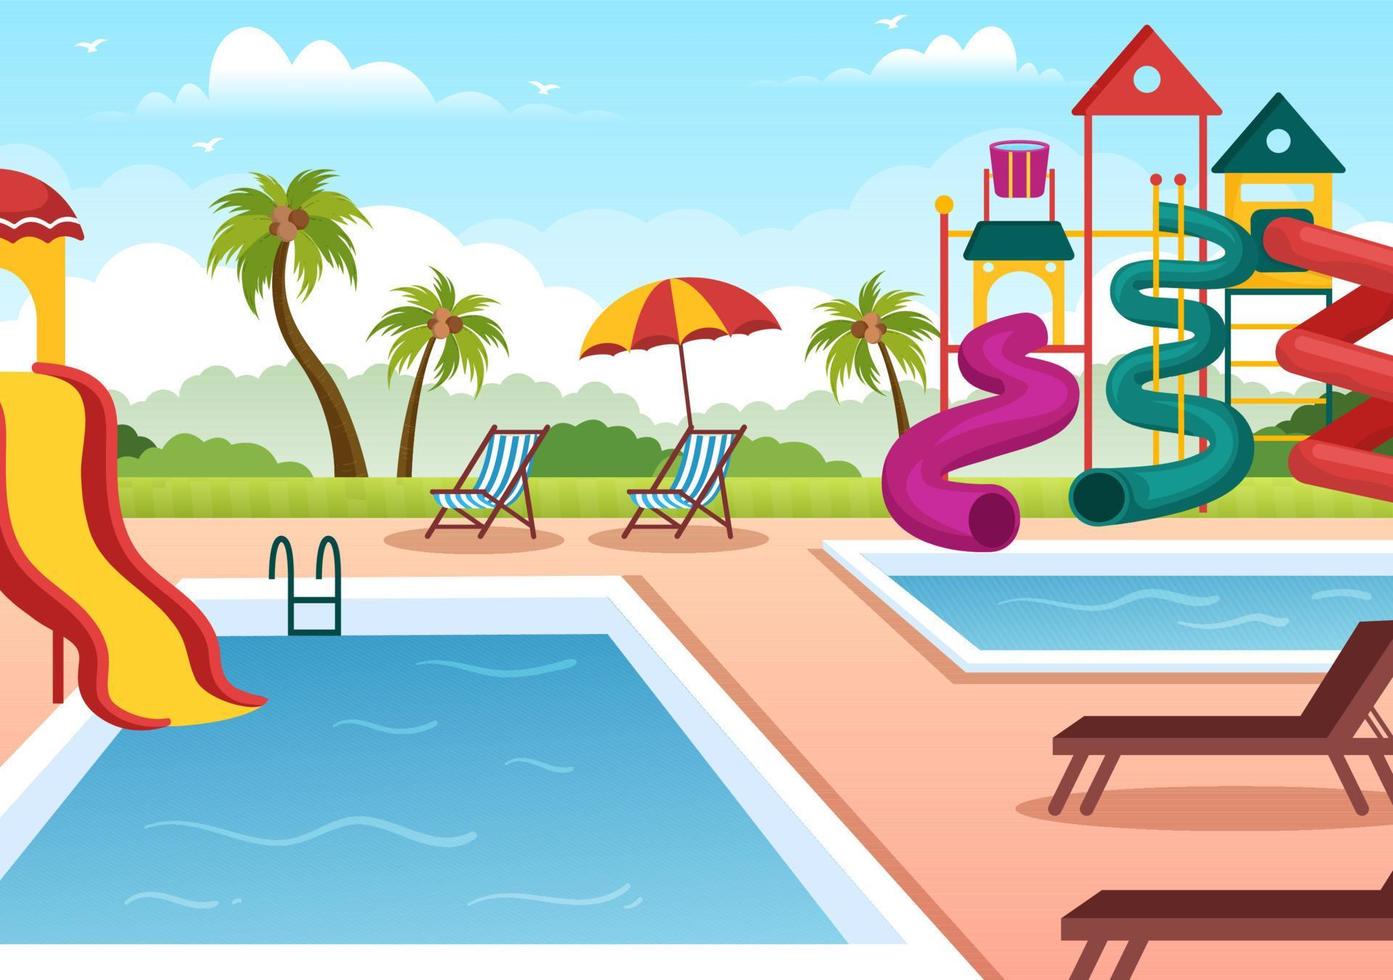 Water Park with Swimming Pool, Amusement, Slide, Palm Trees for Recreation and Outdoor Playground in Flat Cartoon Illustration vector